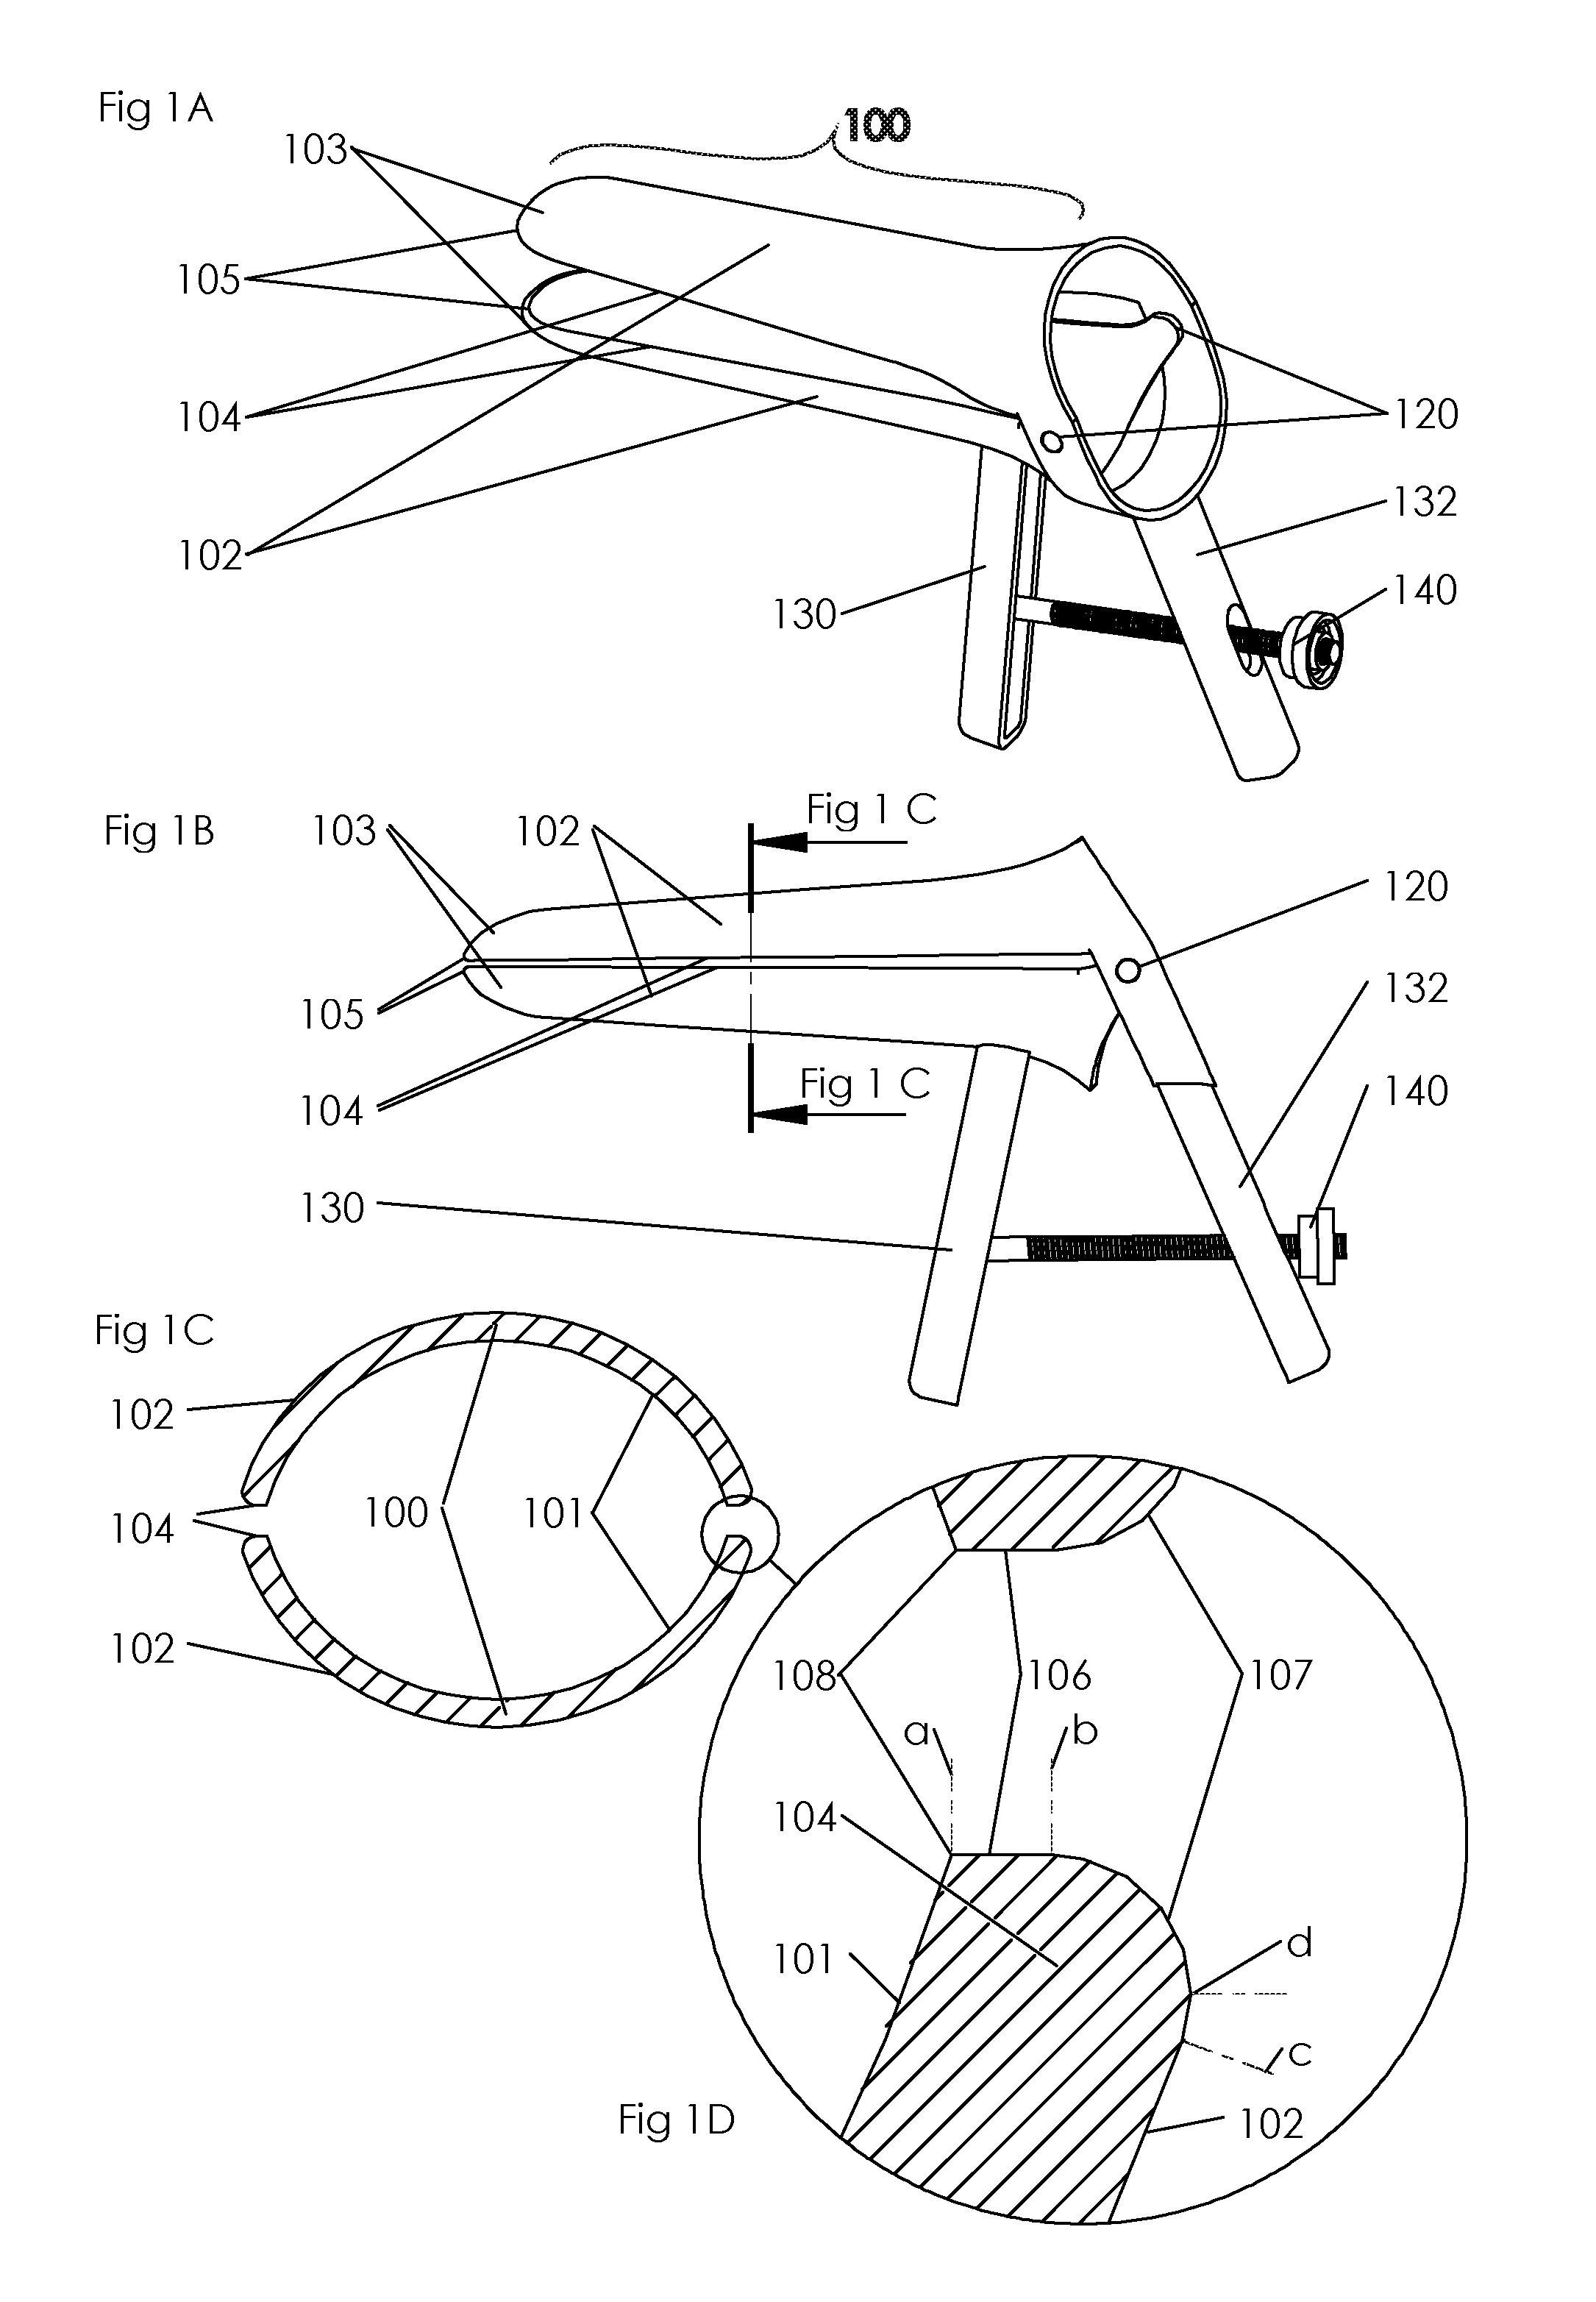 Advanced surgical instrument such as a speculum